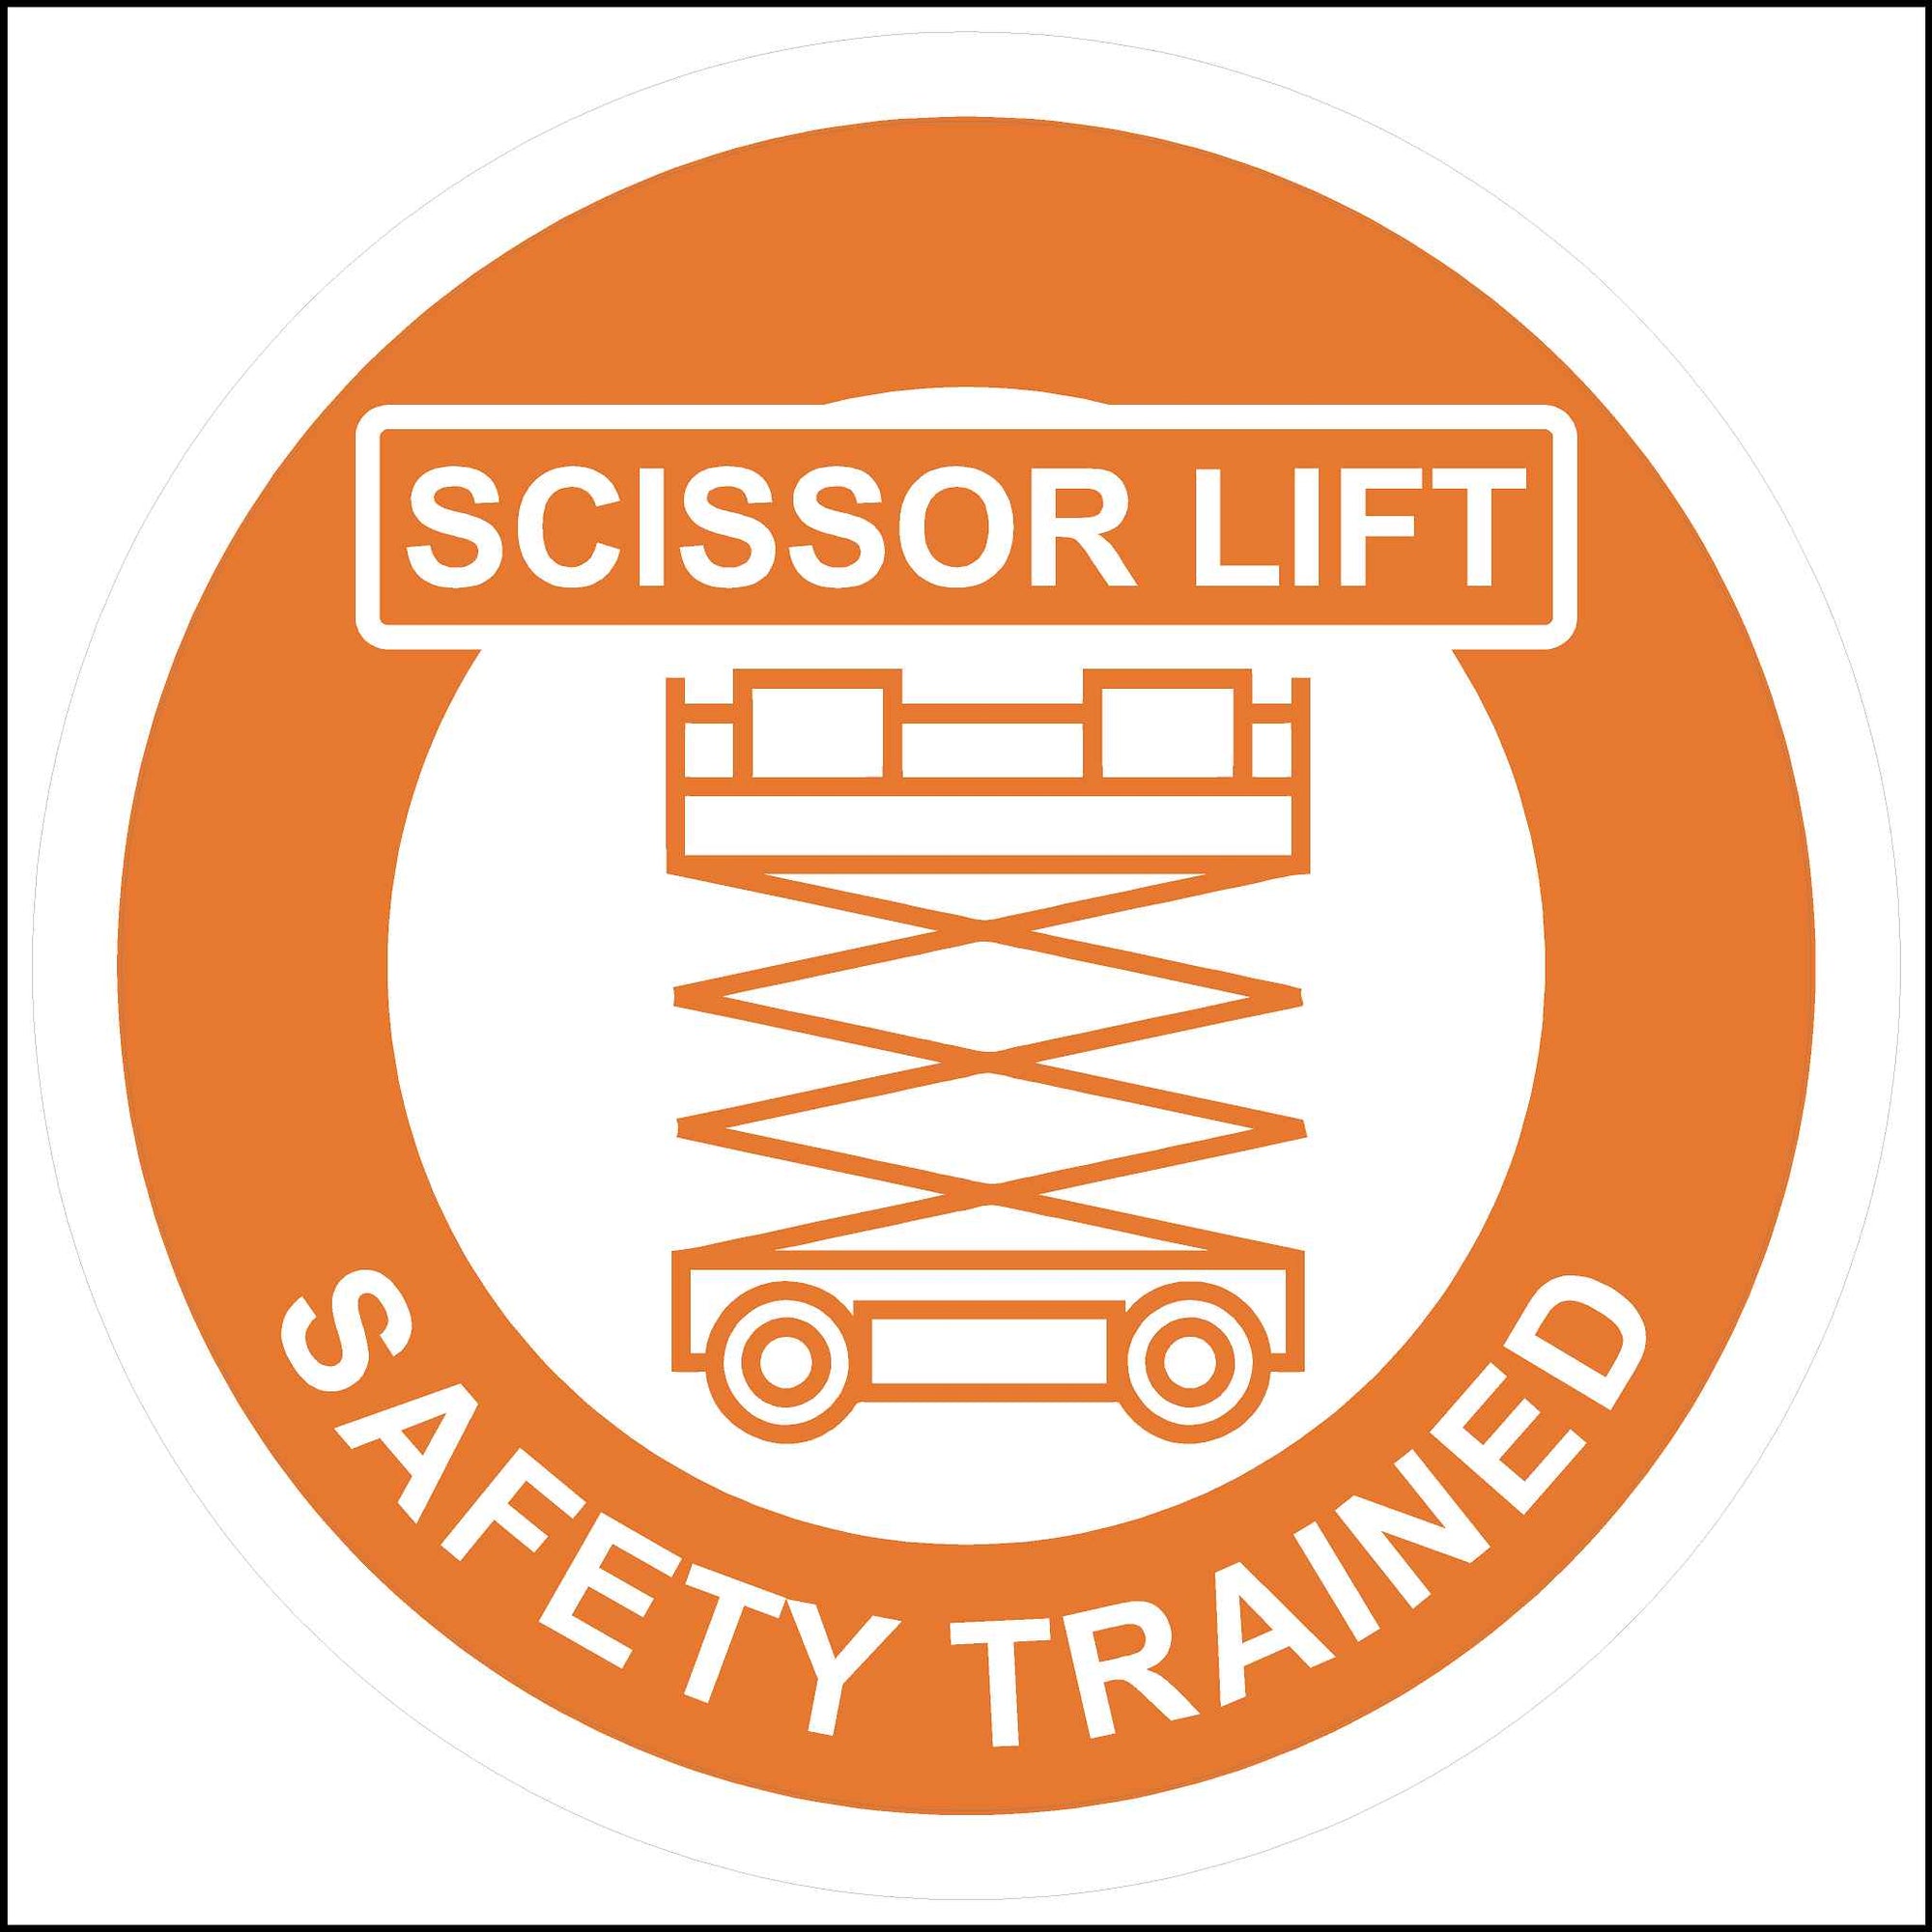 Scissor Lift Safety Trained Hard Hat Safety Stickers printed in orange and white.